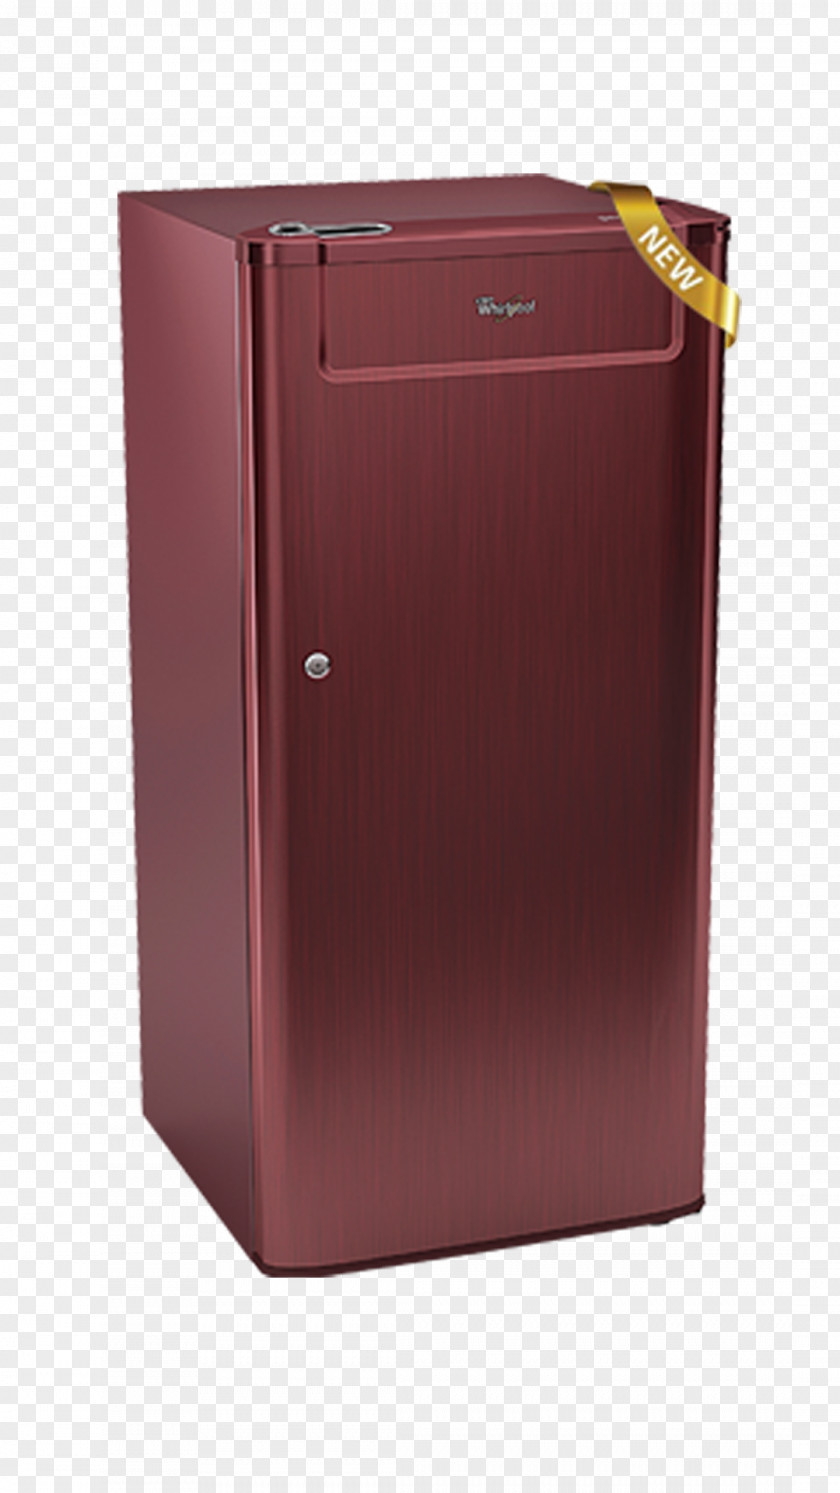 Refrigerator Direct Cool Whirlpool Corporation Home Appliance Of India Limited PNG